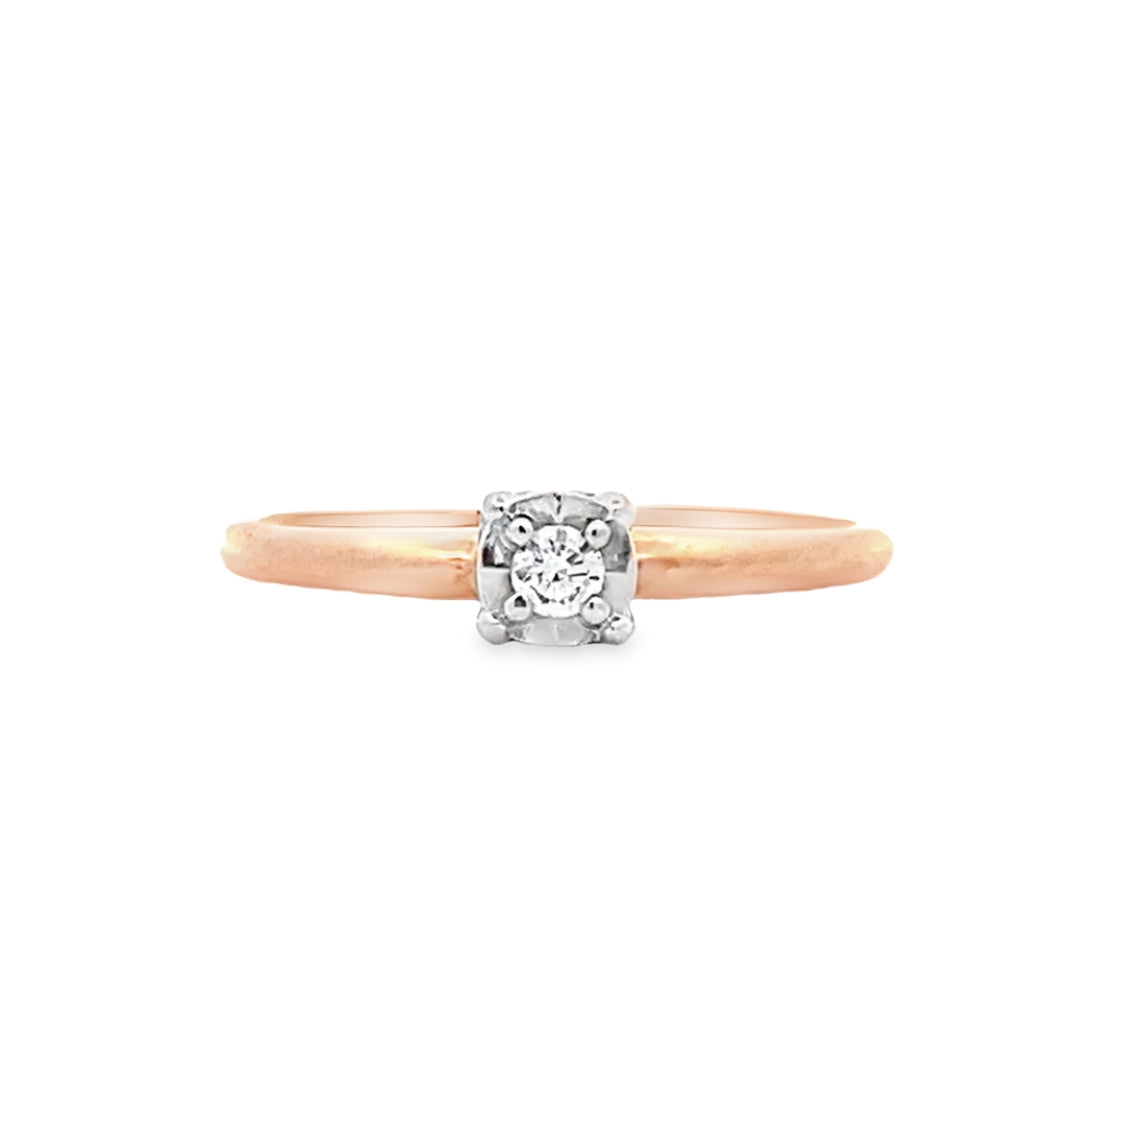 Beeghly & Co. 14 Karat Rose Gold Solitaire Round Diamond Engagement Ring BCR-AS-1